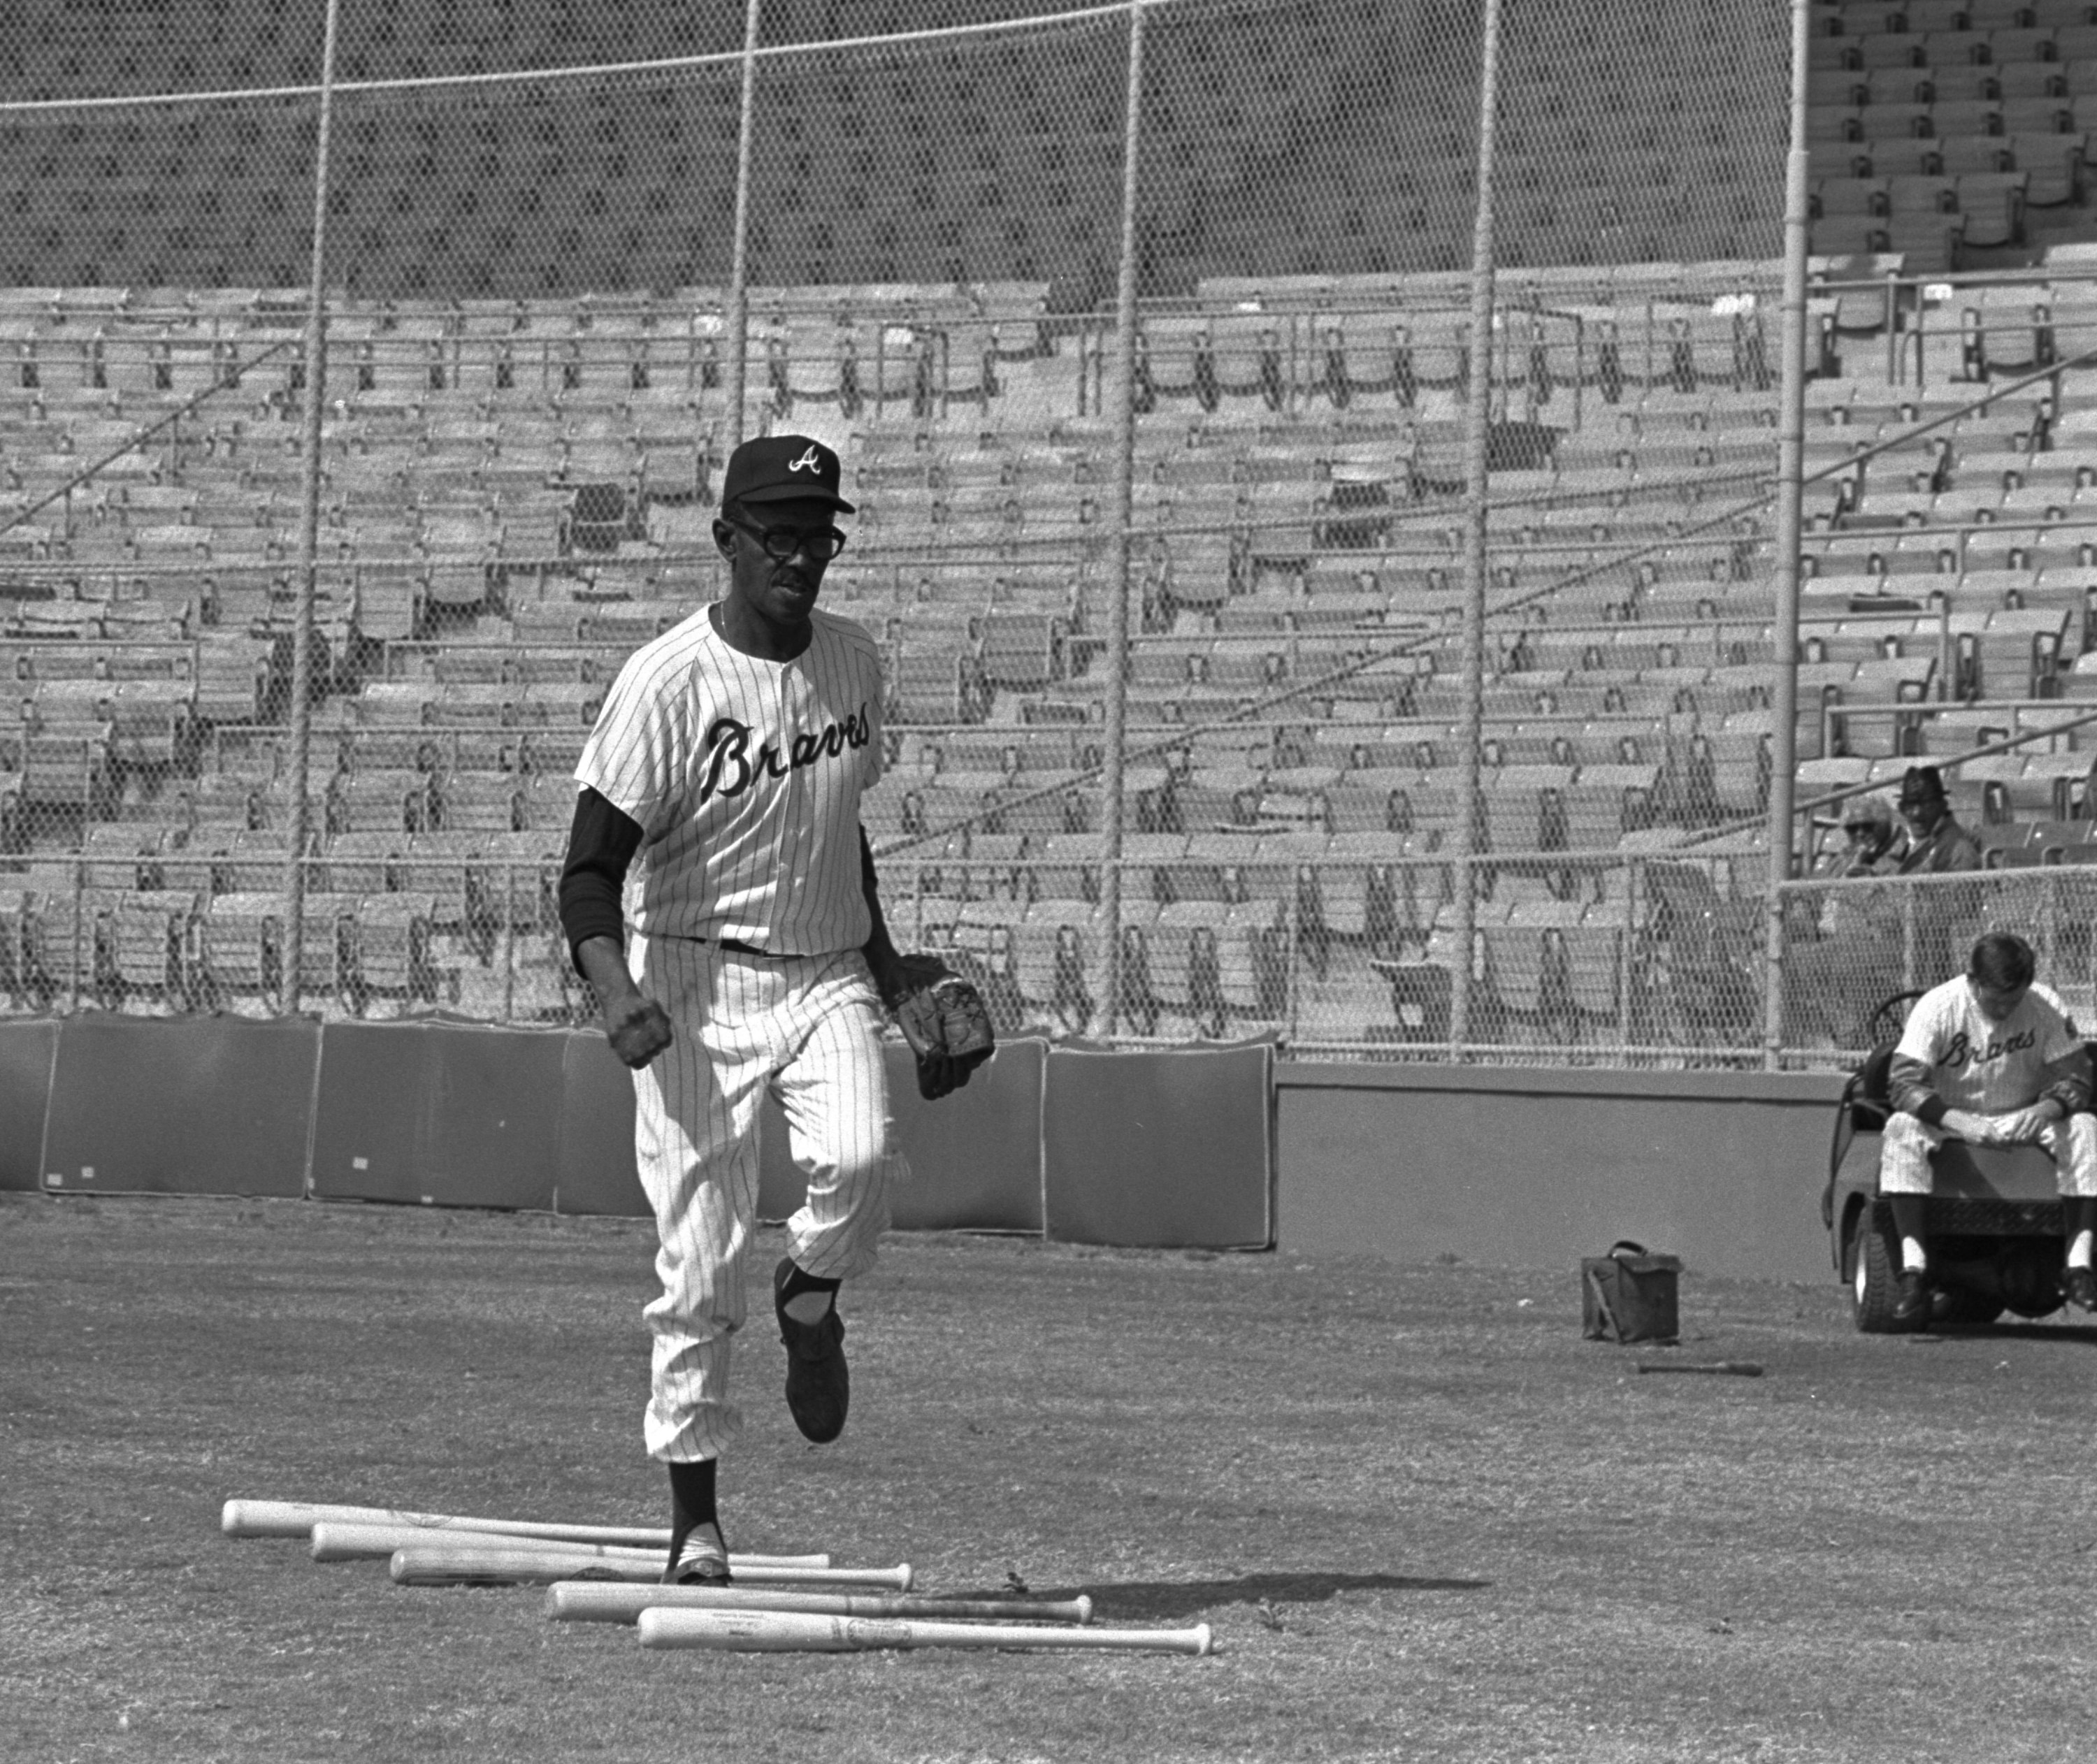 Atlanta Braves assistant trainer Satchel Paige does some exercise hopping over a row of bats during his daily workout at Cleveland's Municipal Stadium on March 9, 1969.